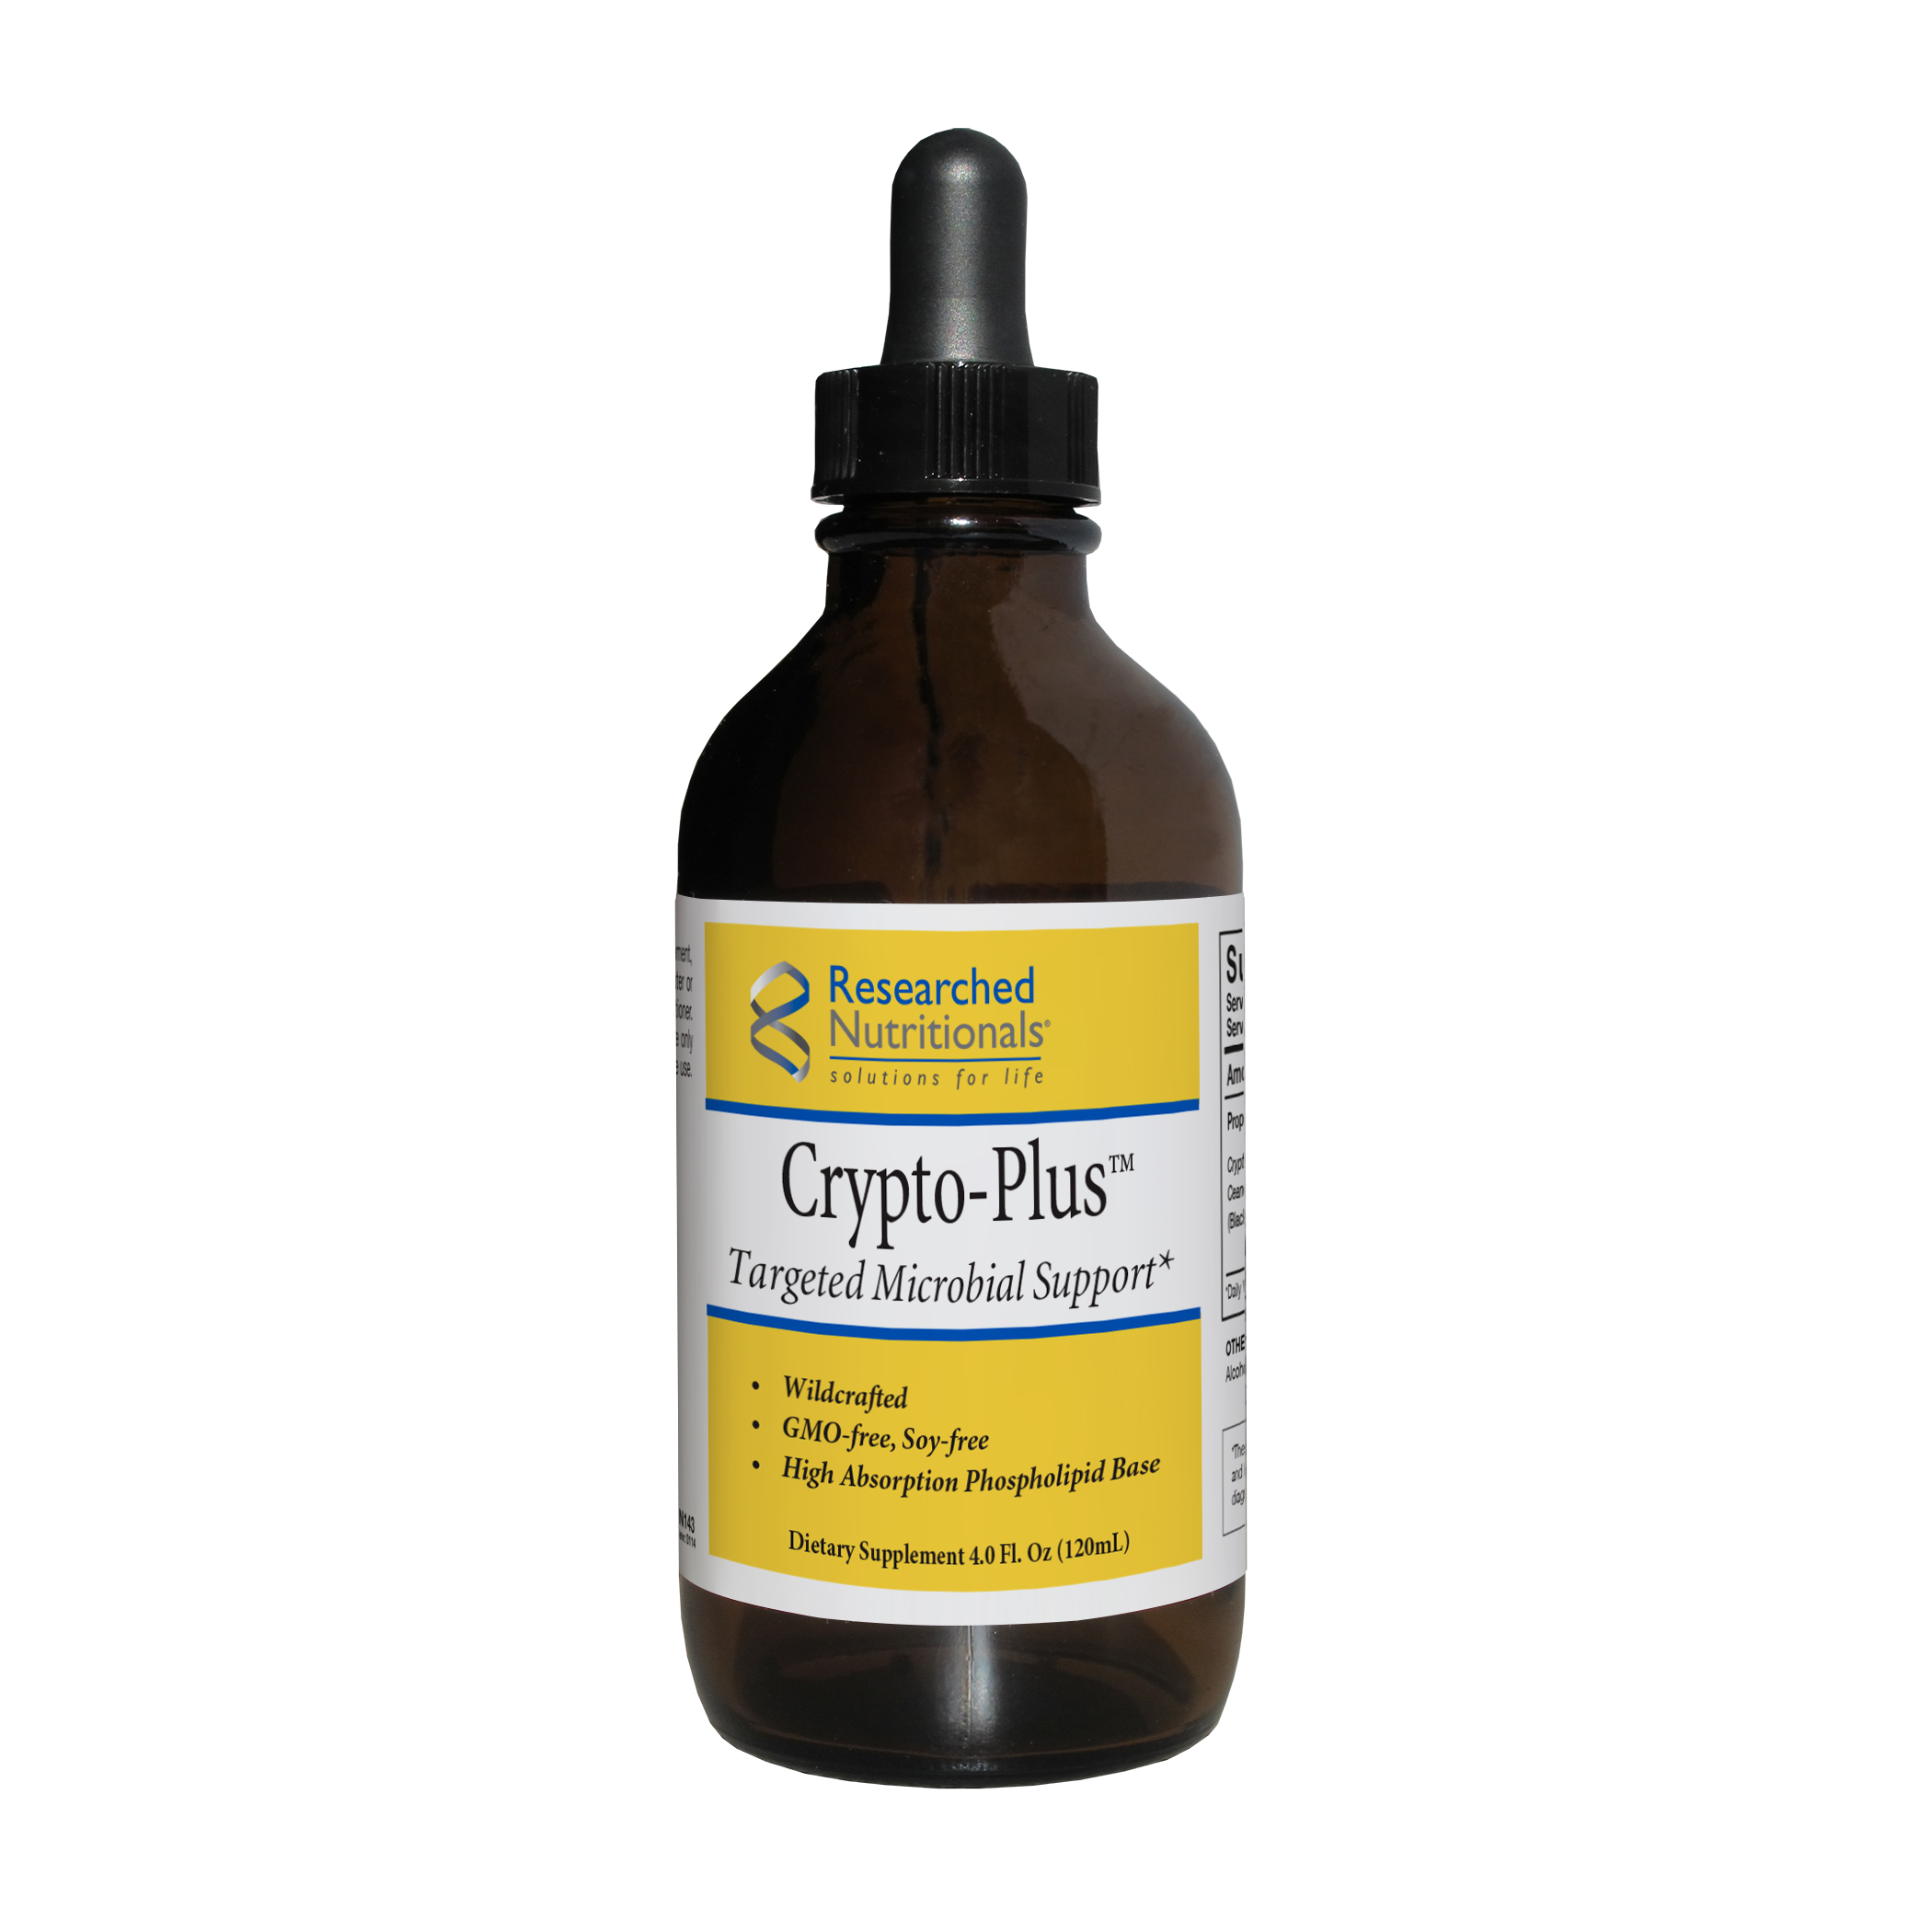 RESEARCHED NUTRITIONALS - Crypto-Plus (GMO-free) 4oz